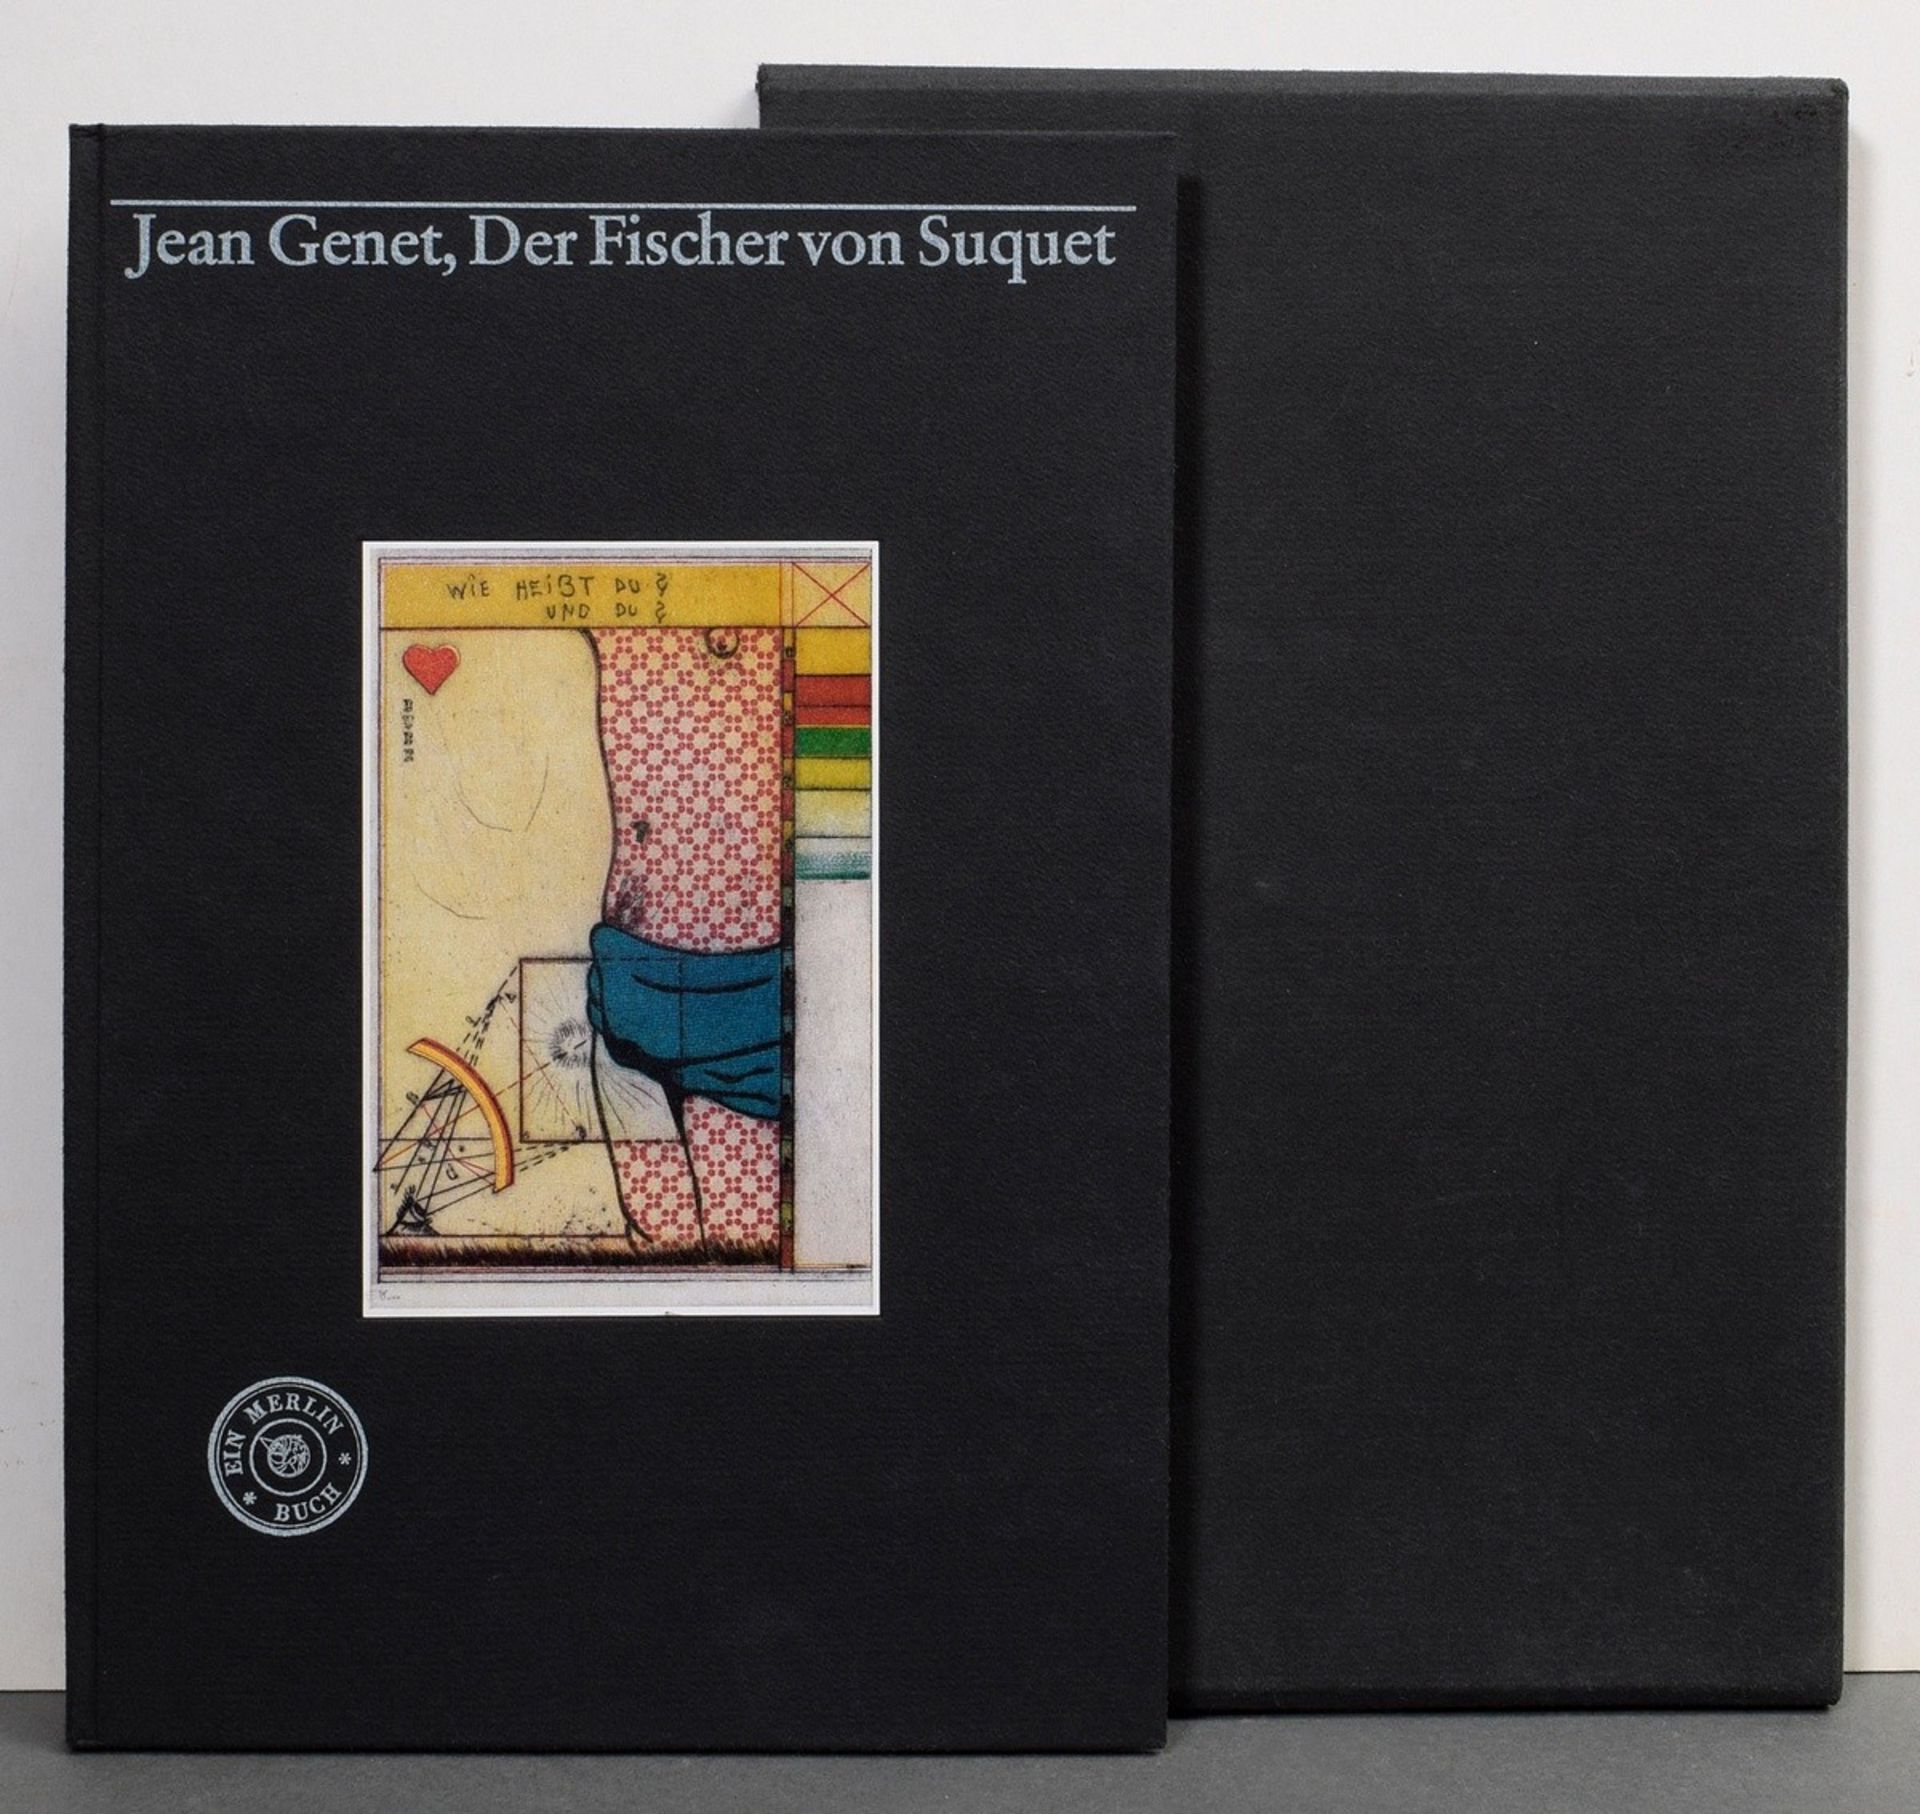 Genet, Jean (1910-1986) "The Fisherman of Suquet", no. 47, 1st edition 1970, Merlin Verlag/Hbg., in - Image 10 of 10